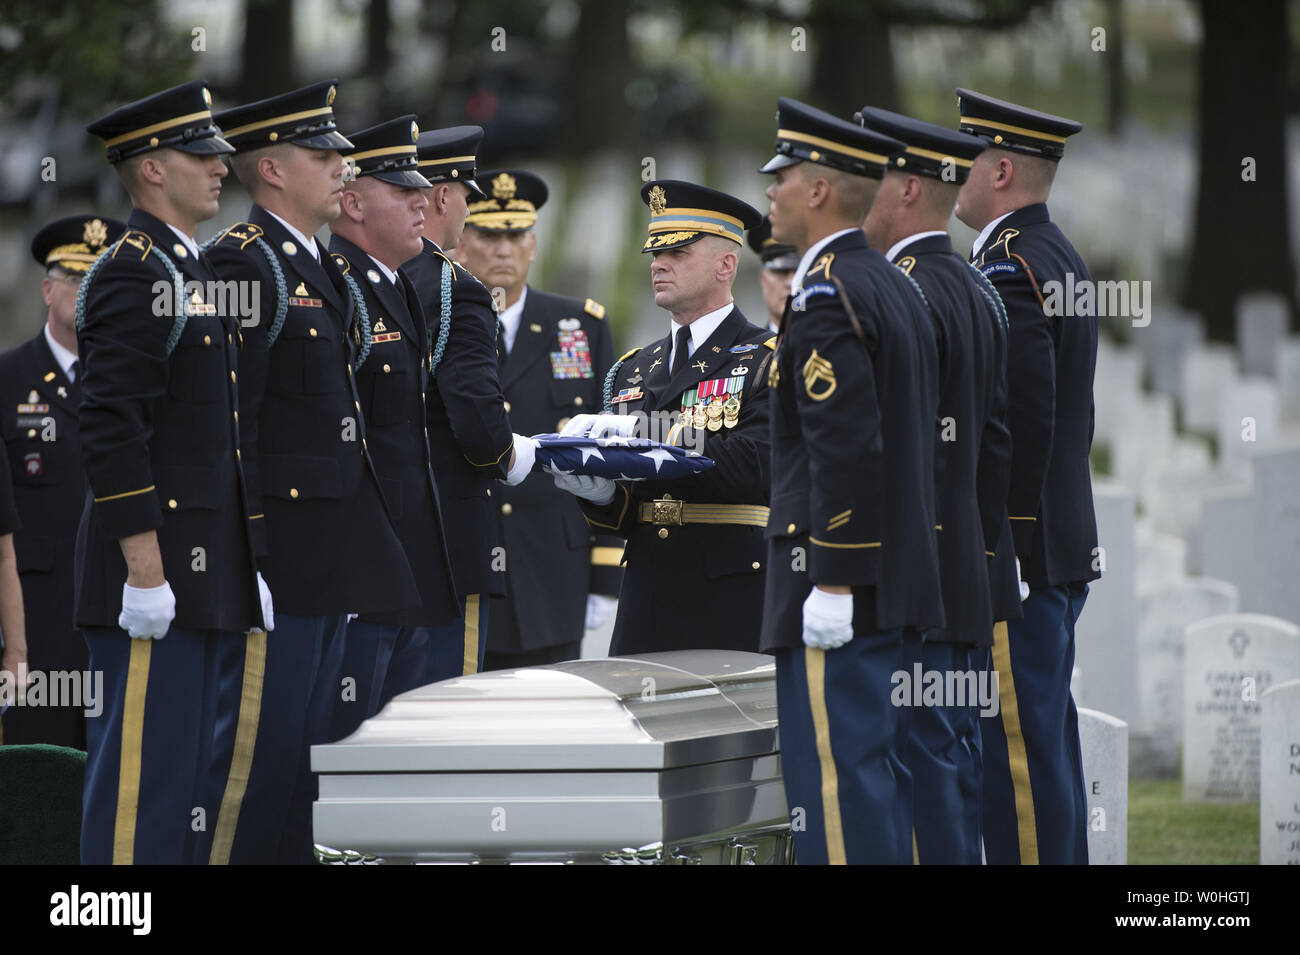 An Army Honor Guard prepares a flag to be presented to Susan Myers, the widow of Army Maj. Gen. Harold J. Greene, during Greene's graveside service at Arlington National Cemetery on August 14, 2014 in Arlington, Virginia. Greene was shot and killed by a uniformed Afghan soldier while Greene was visiting a military academy in Kabul. UPI/Kevin Dietsch Stock Photo